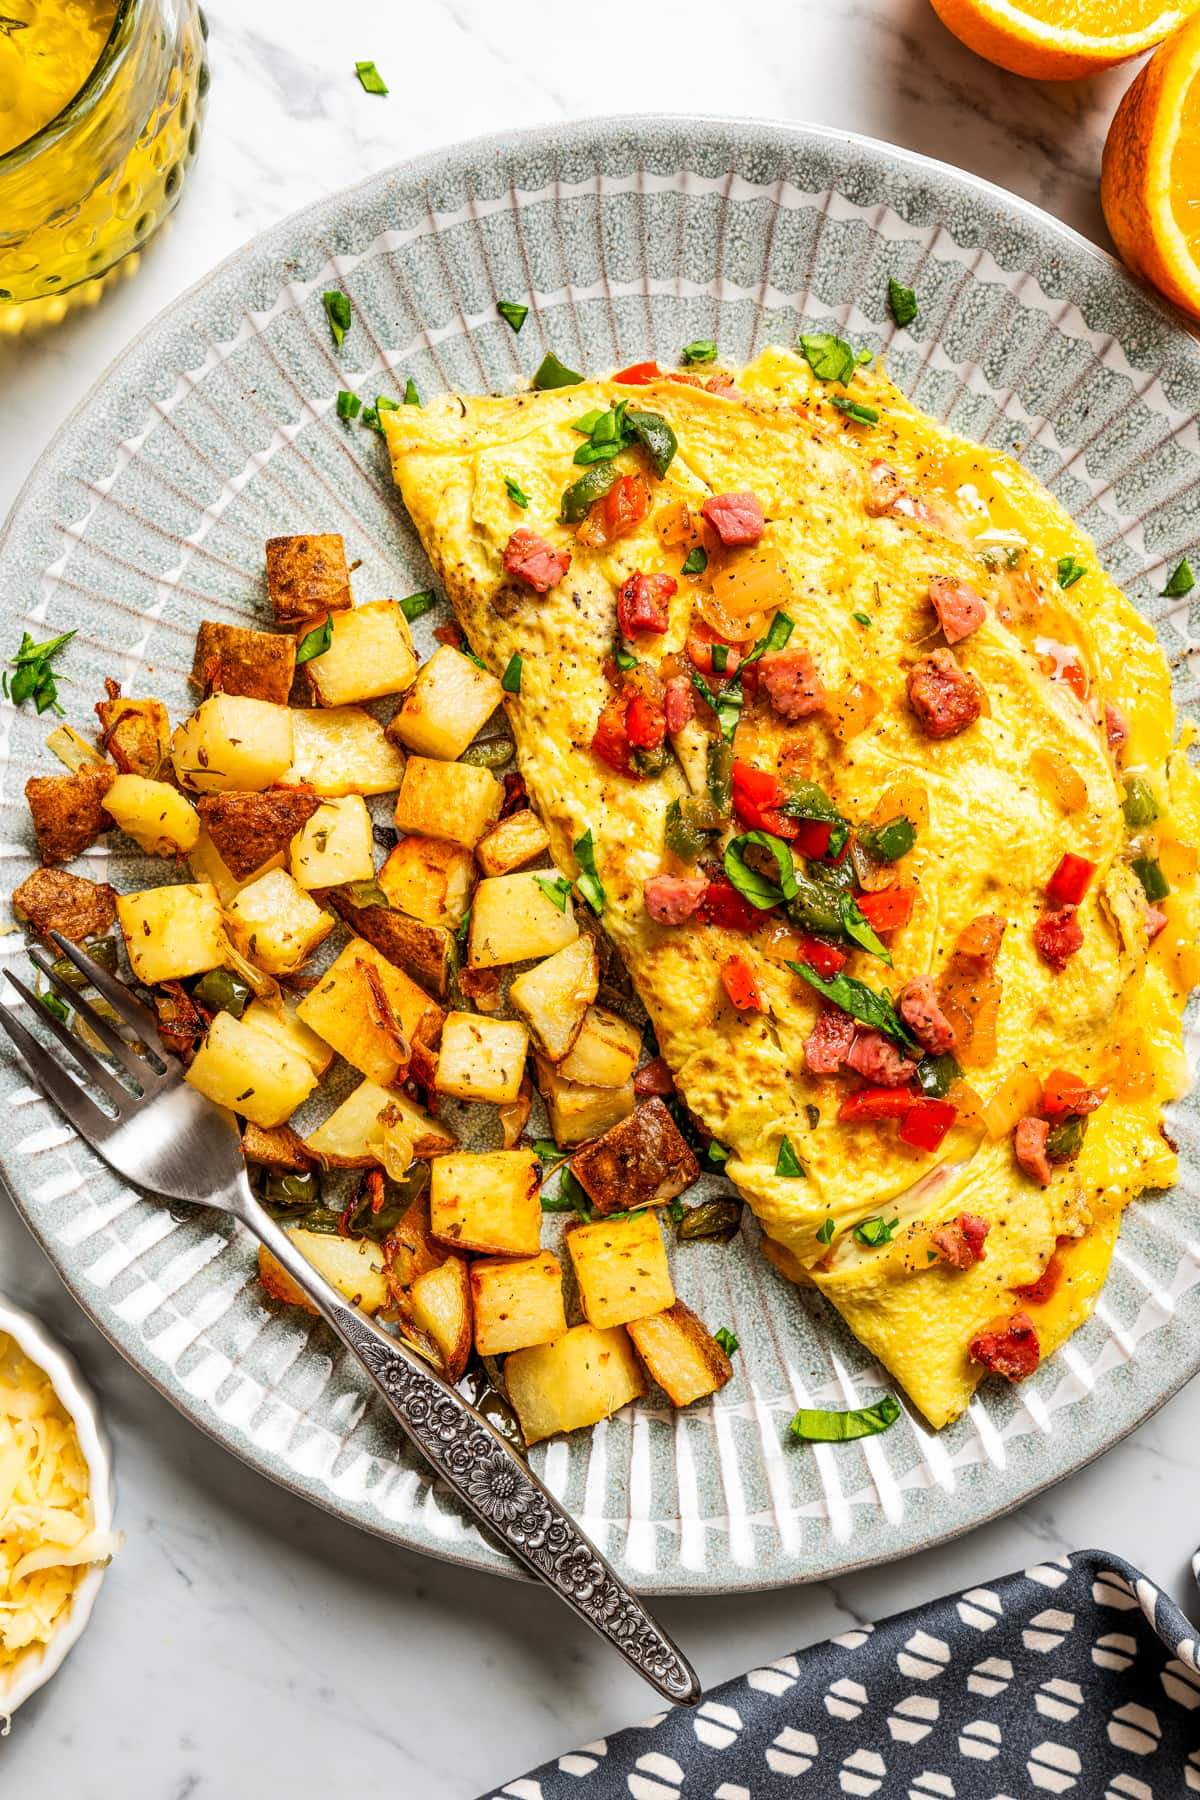 Overhead image of a Western omelette served on a plate with diced breakfast potatoes.